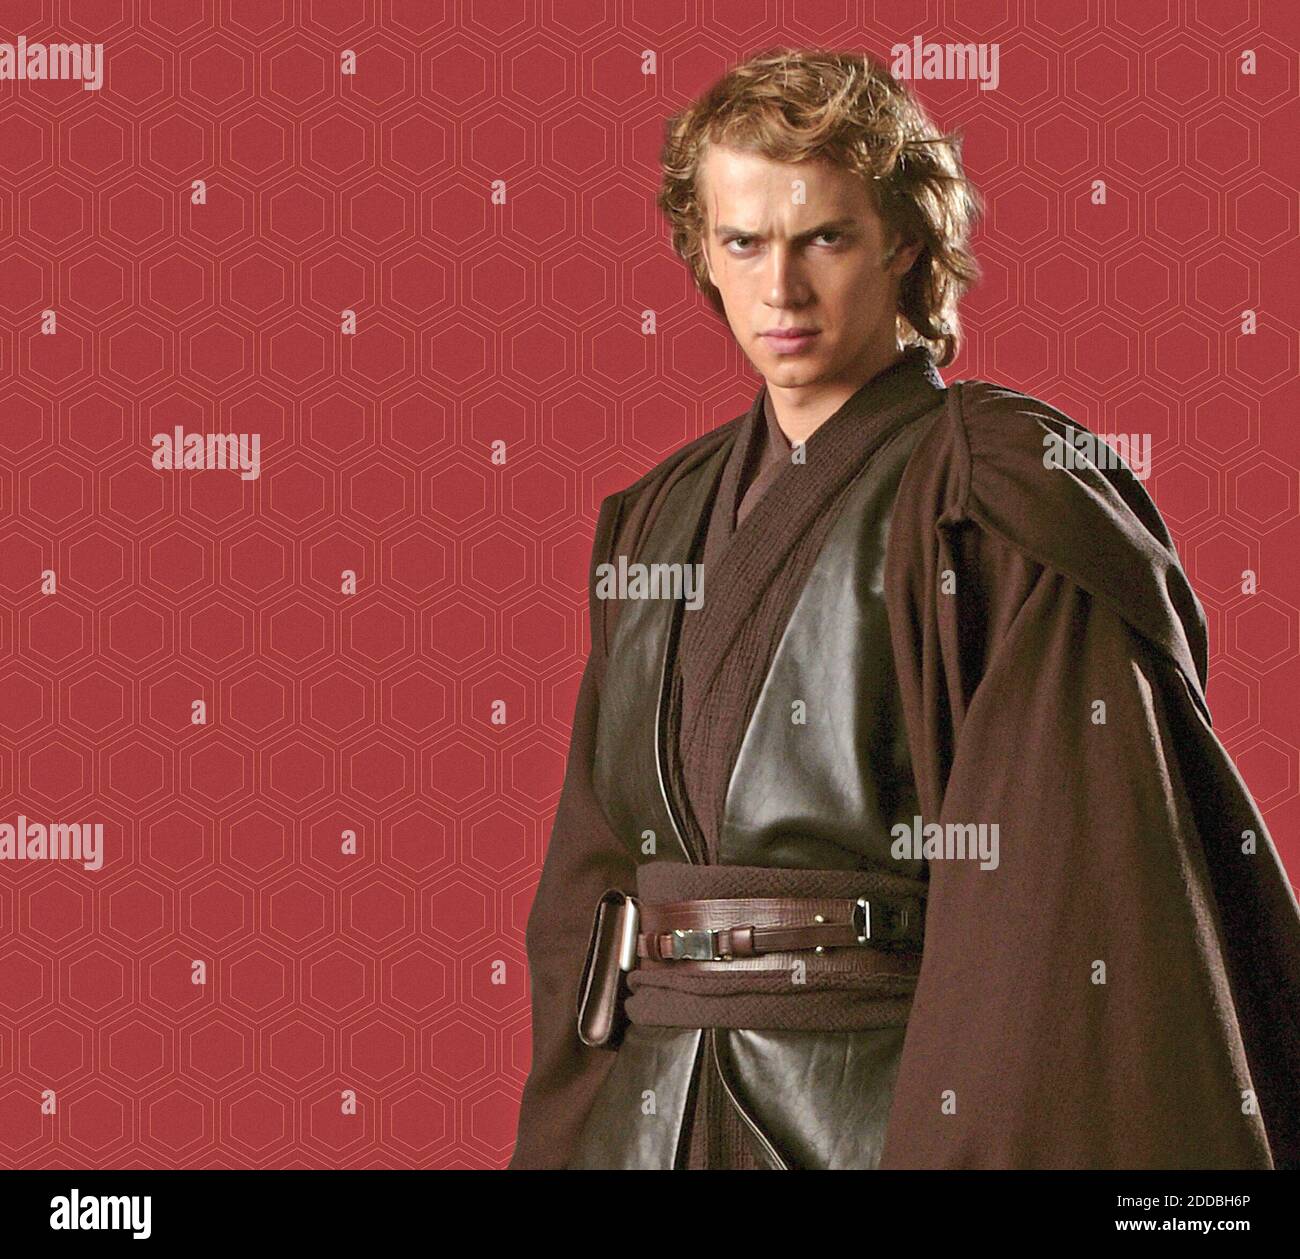 NO FILM, NO VIDEO, NO TV, NO DOCUMENTARY - Anakin Skywalker (Hayden Christensen) in a standard Jedi tunic. The dark color expresses his independence from the Jedi Council, in Star Wars. Photo by KRT/ABACAPRESS.COM Stock Photo